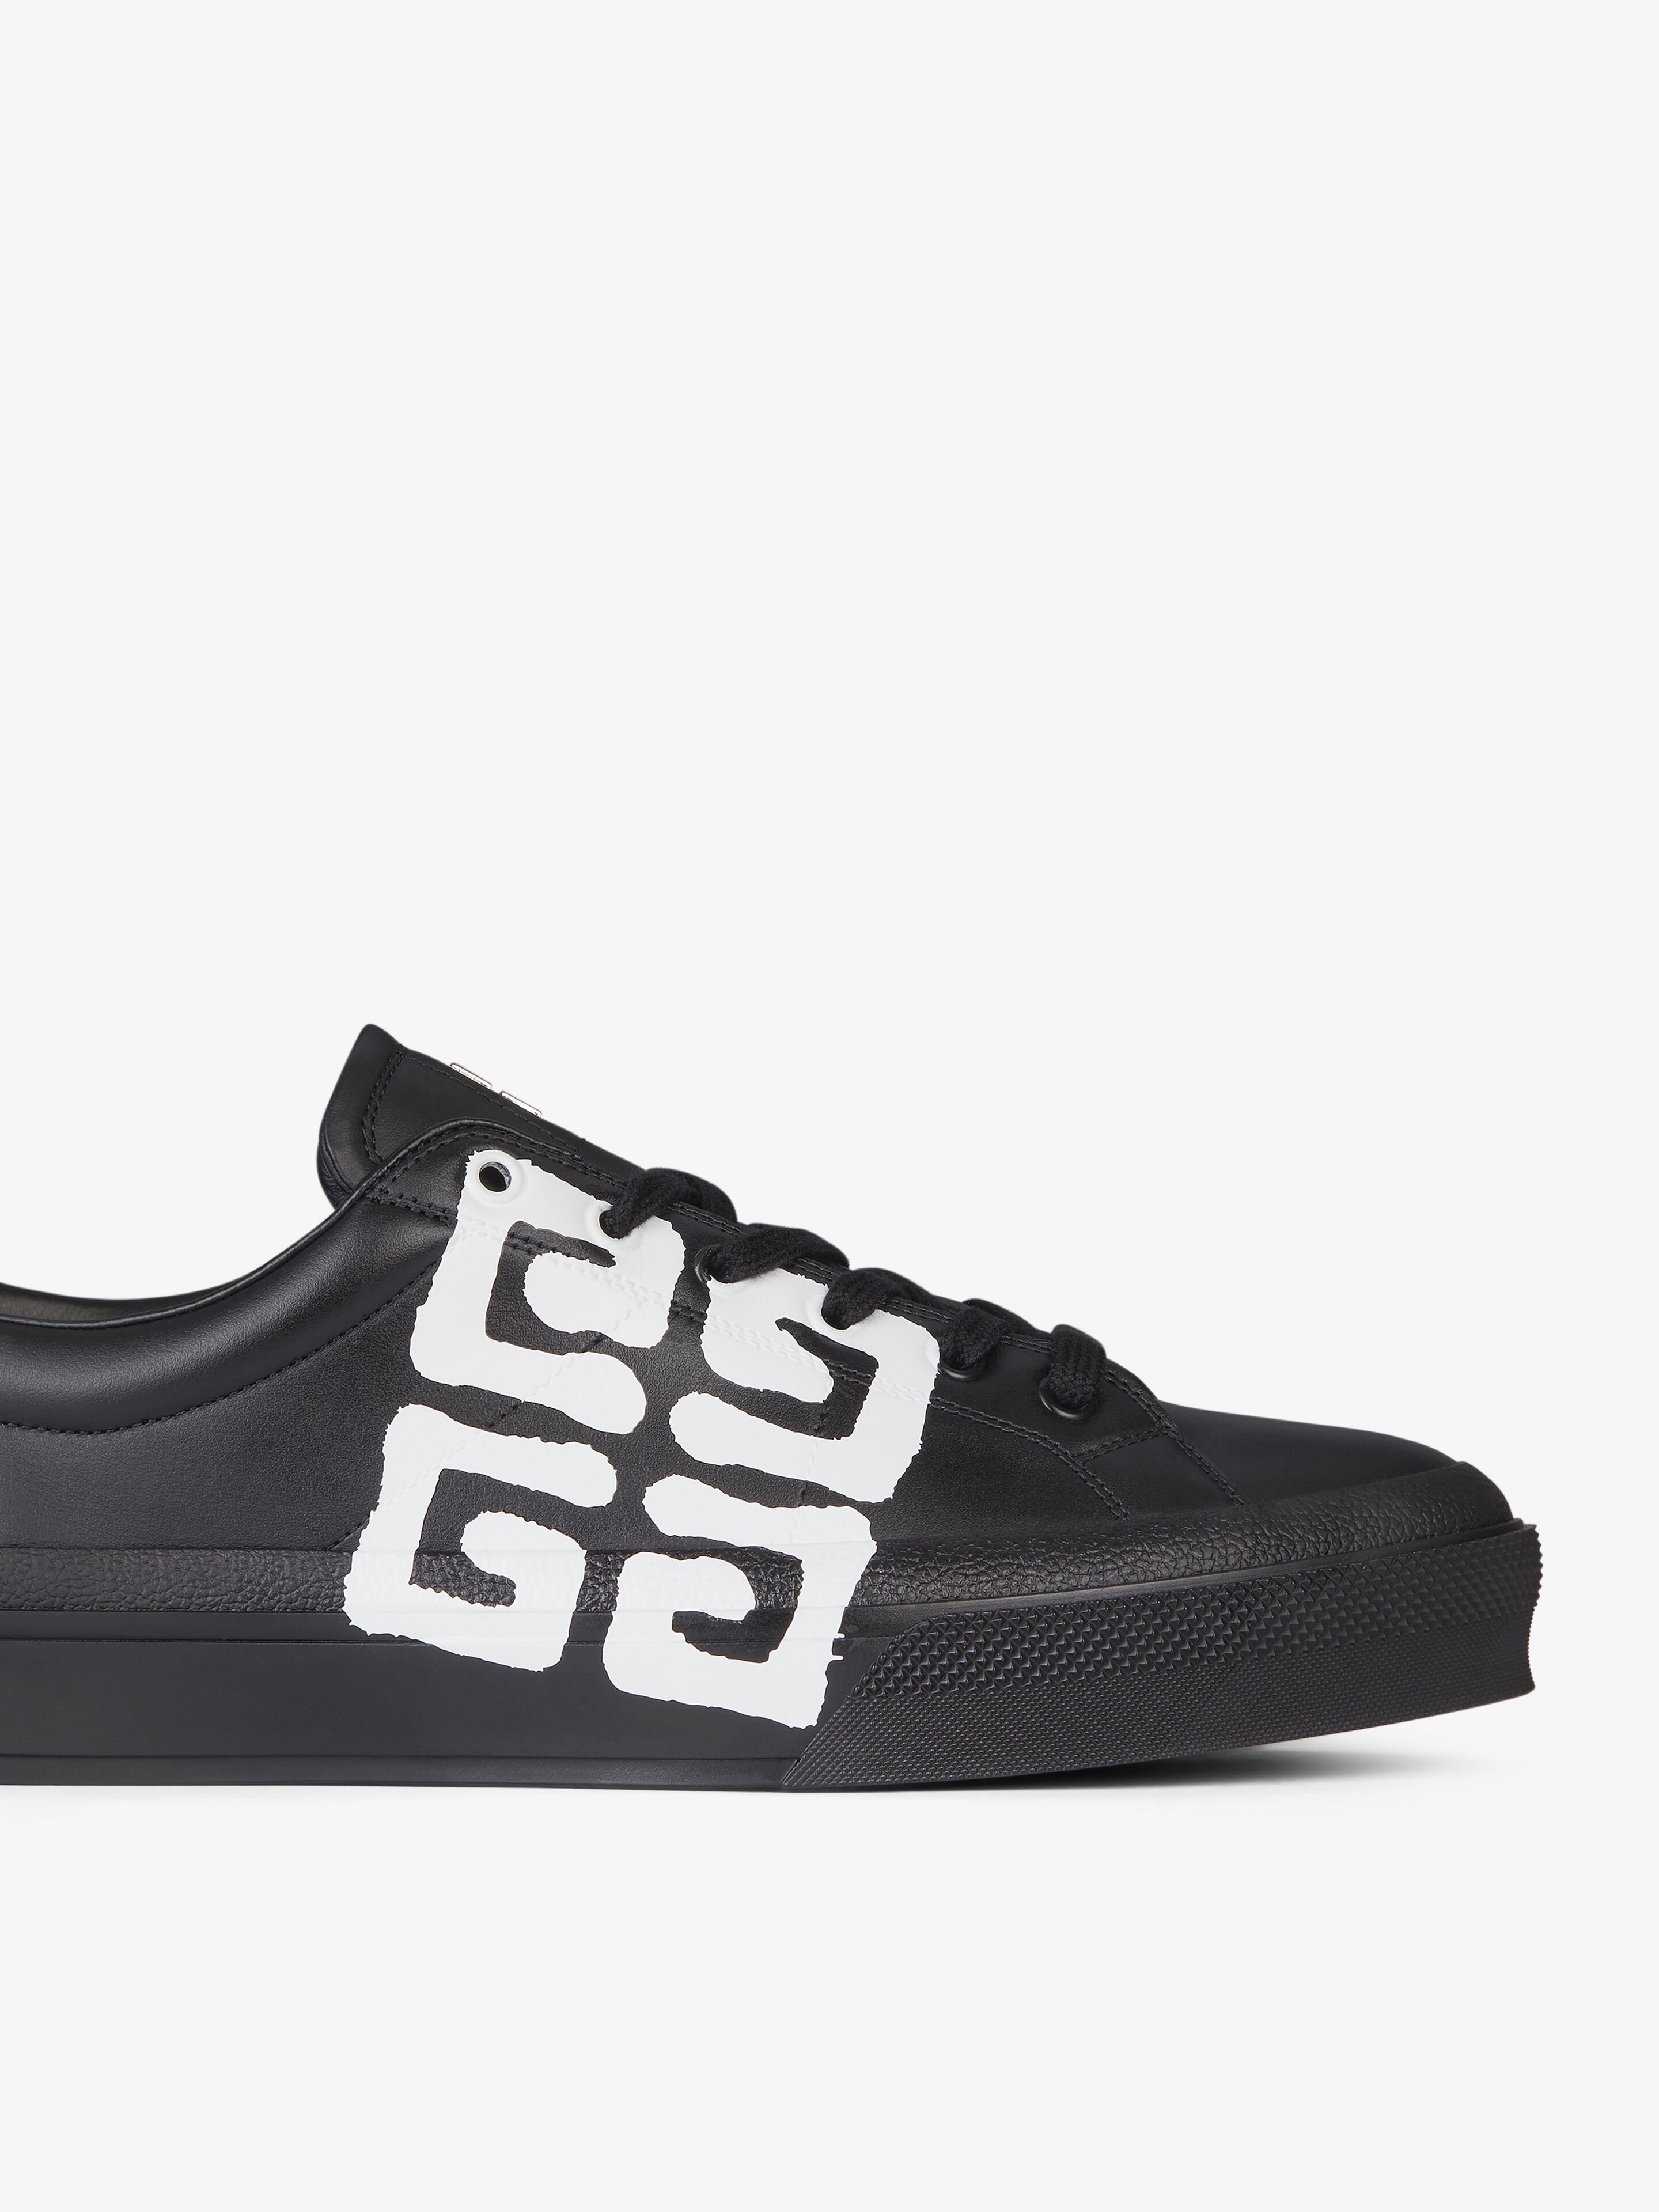 CITY SPORT SNEAKERS IN LEATHER WITH TAG EFFECT 4G PRINT - 7